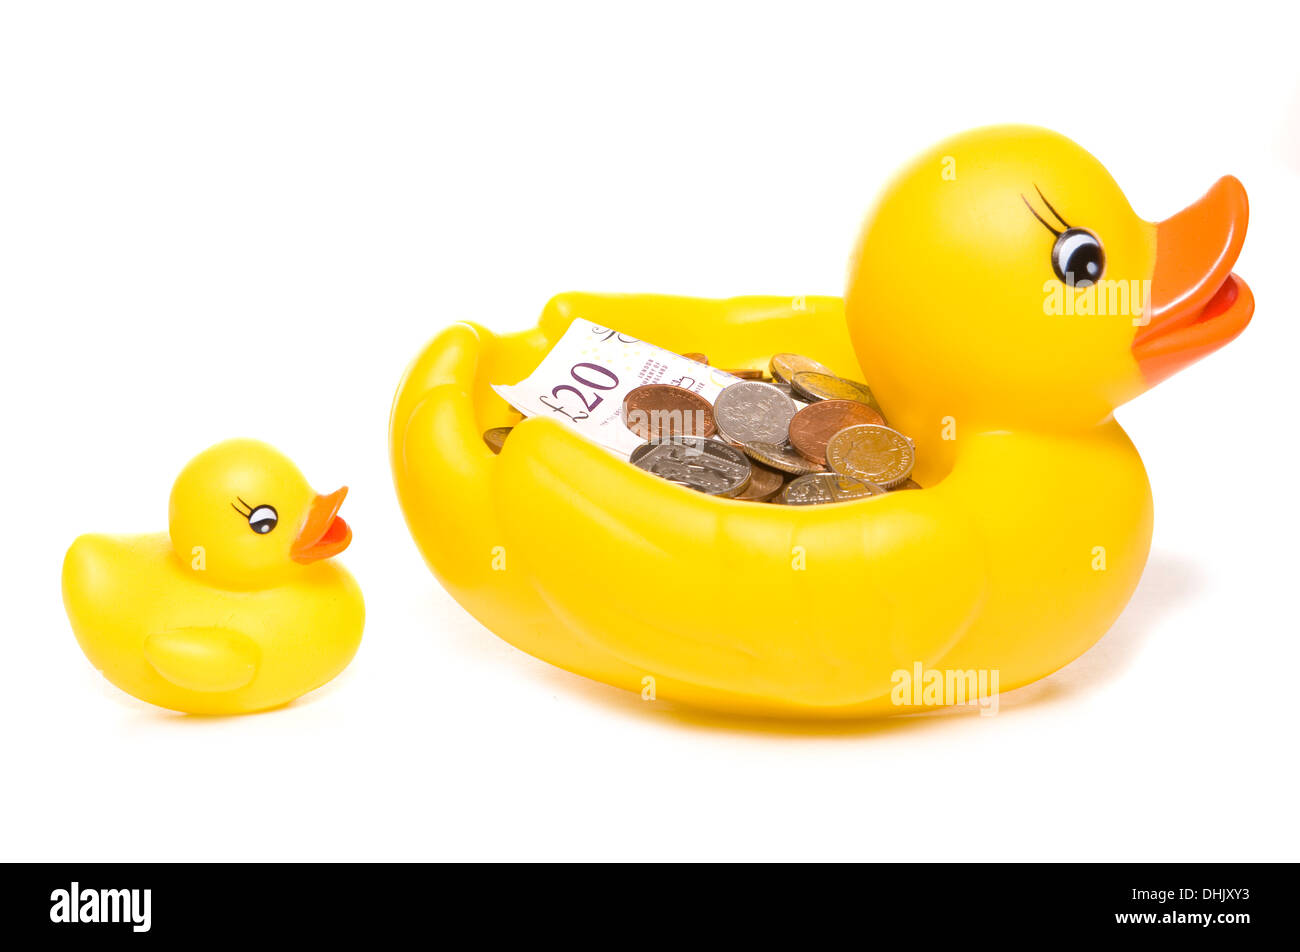 Rubber duck with money studio cutout Stock Photo